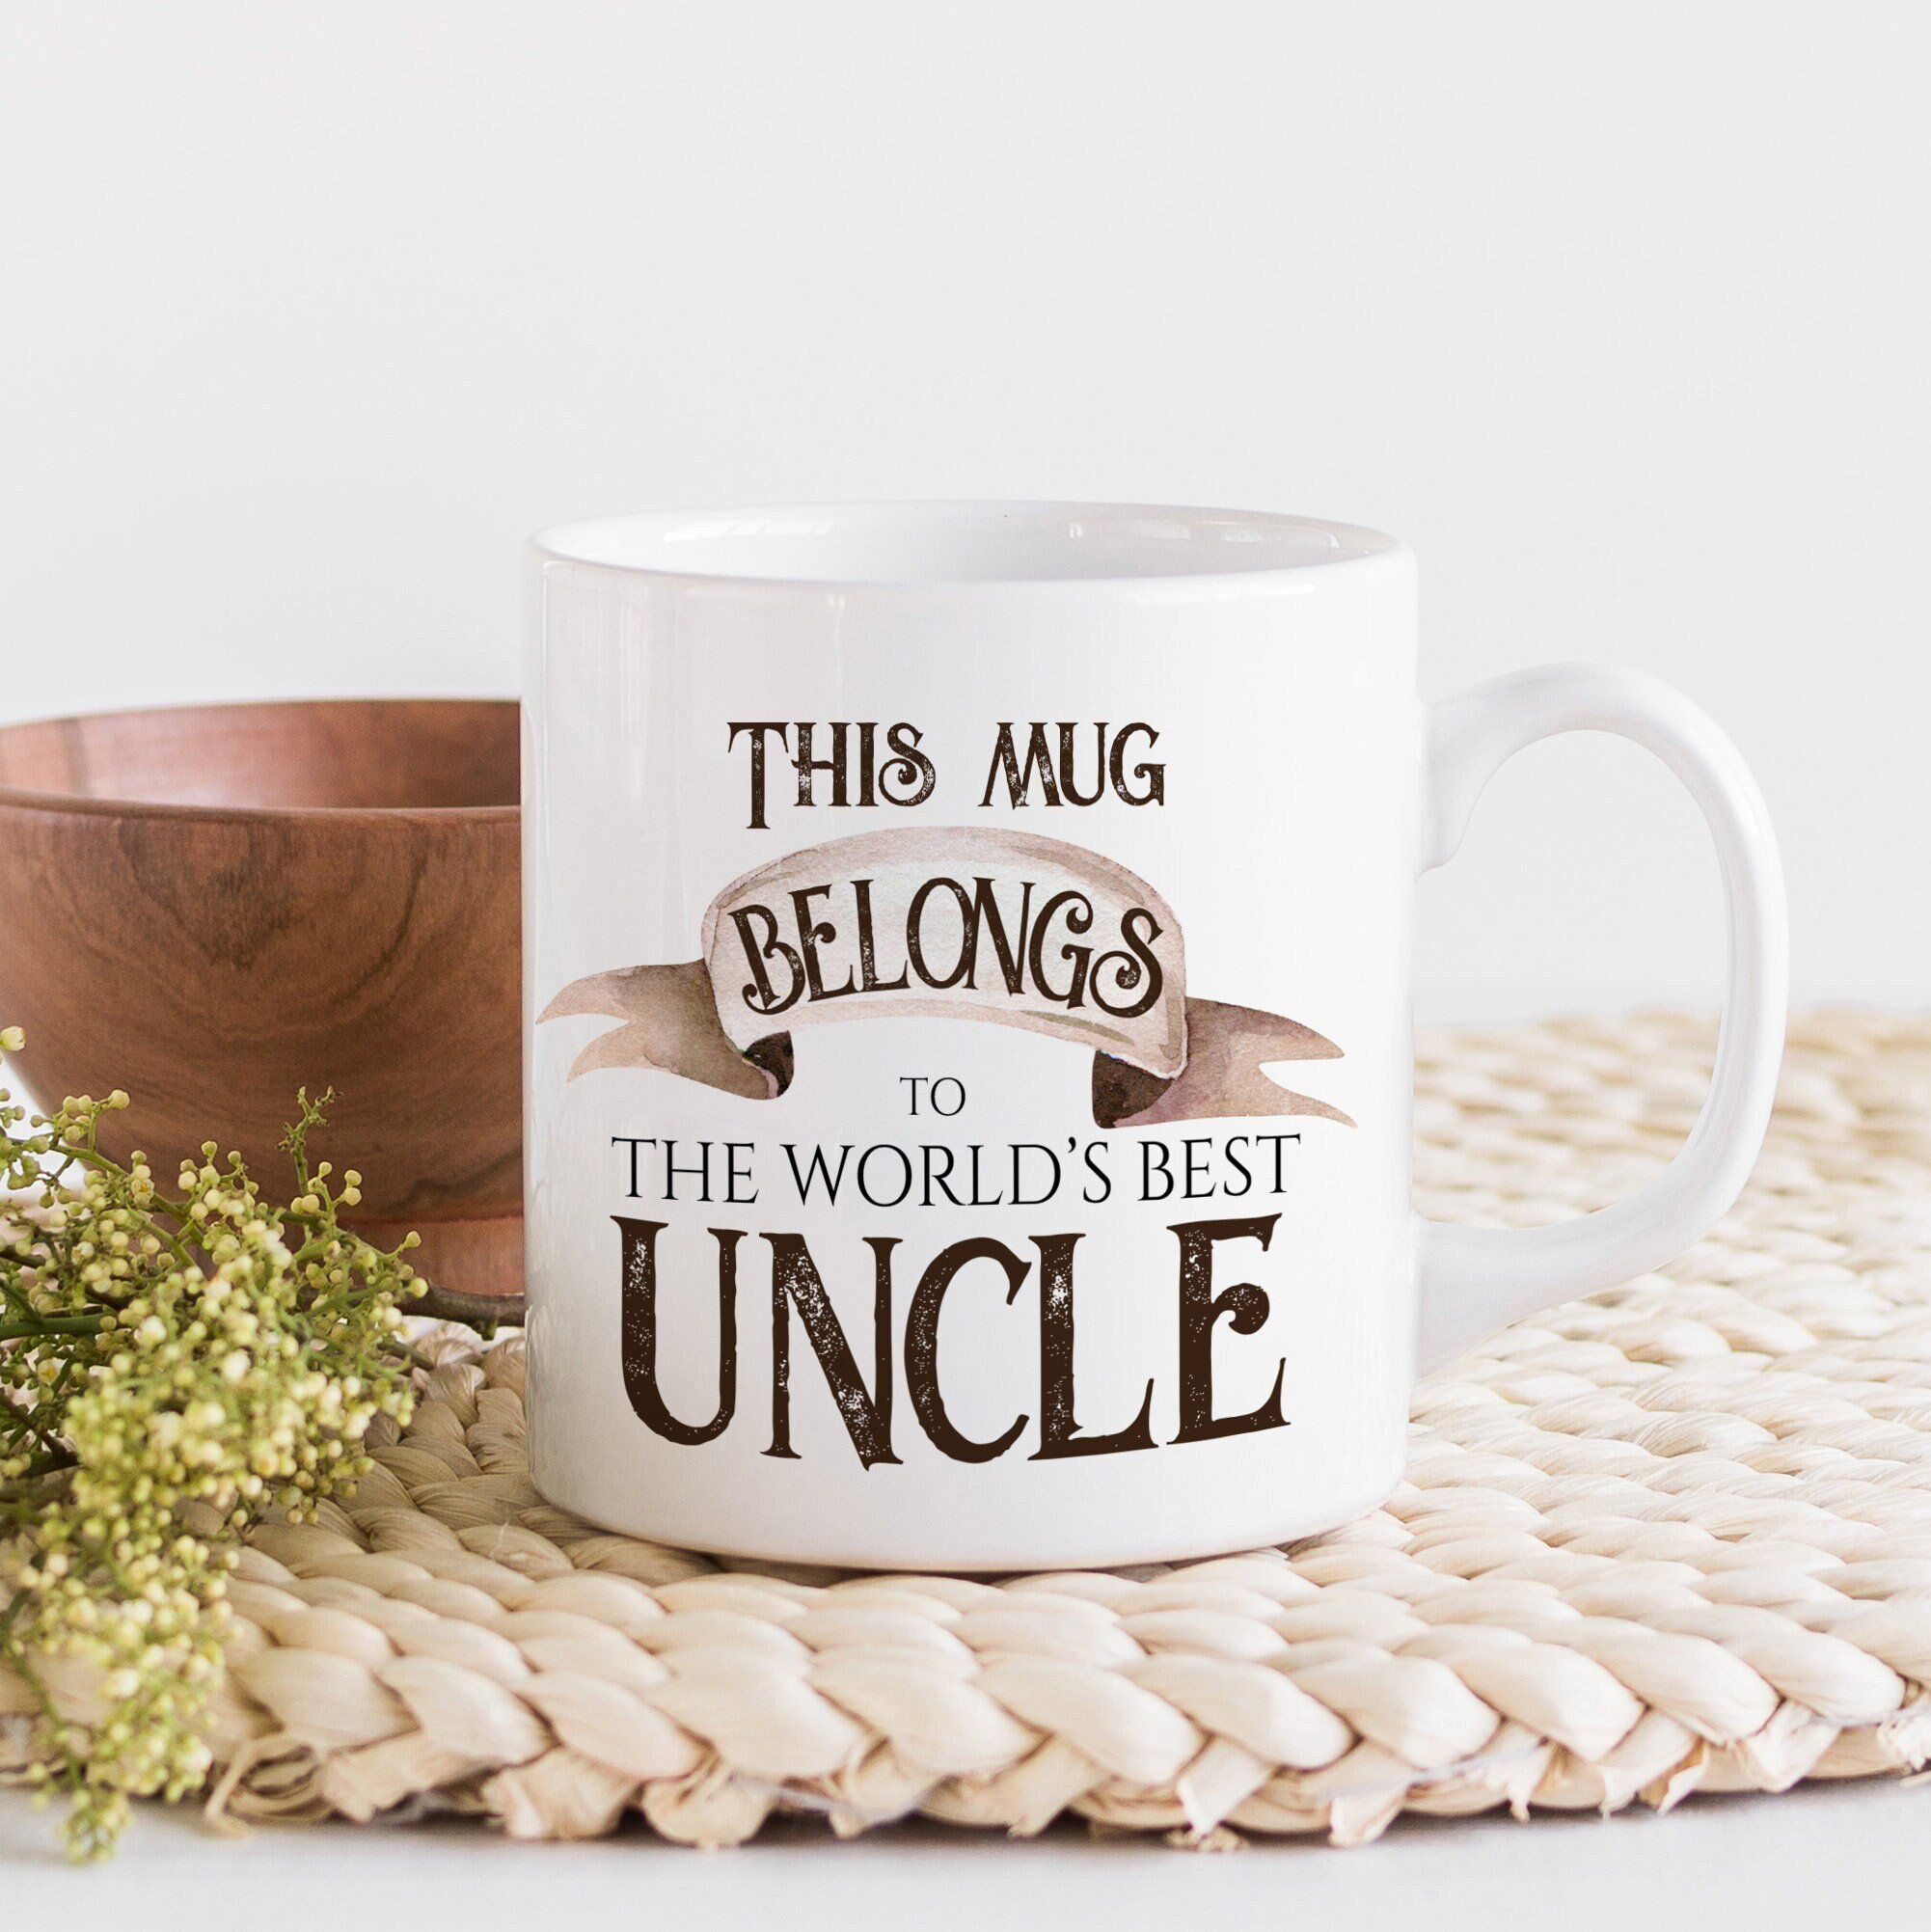 This mug belongs to the world's best dad, Father's Day gift, Christmas gift for daddy, Dada present, Best dad Ever